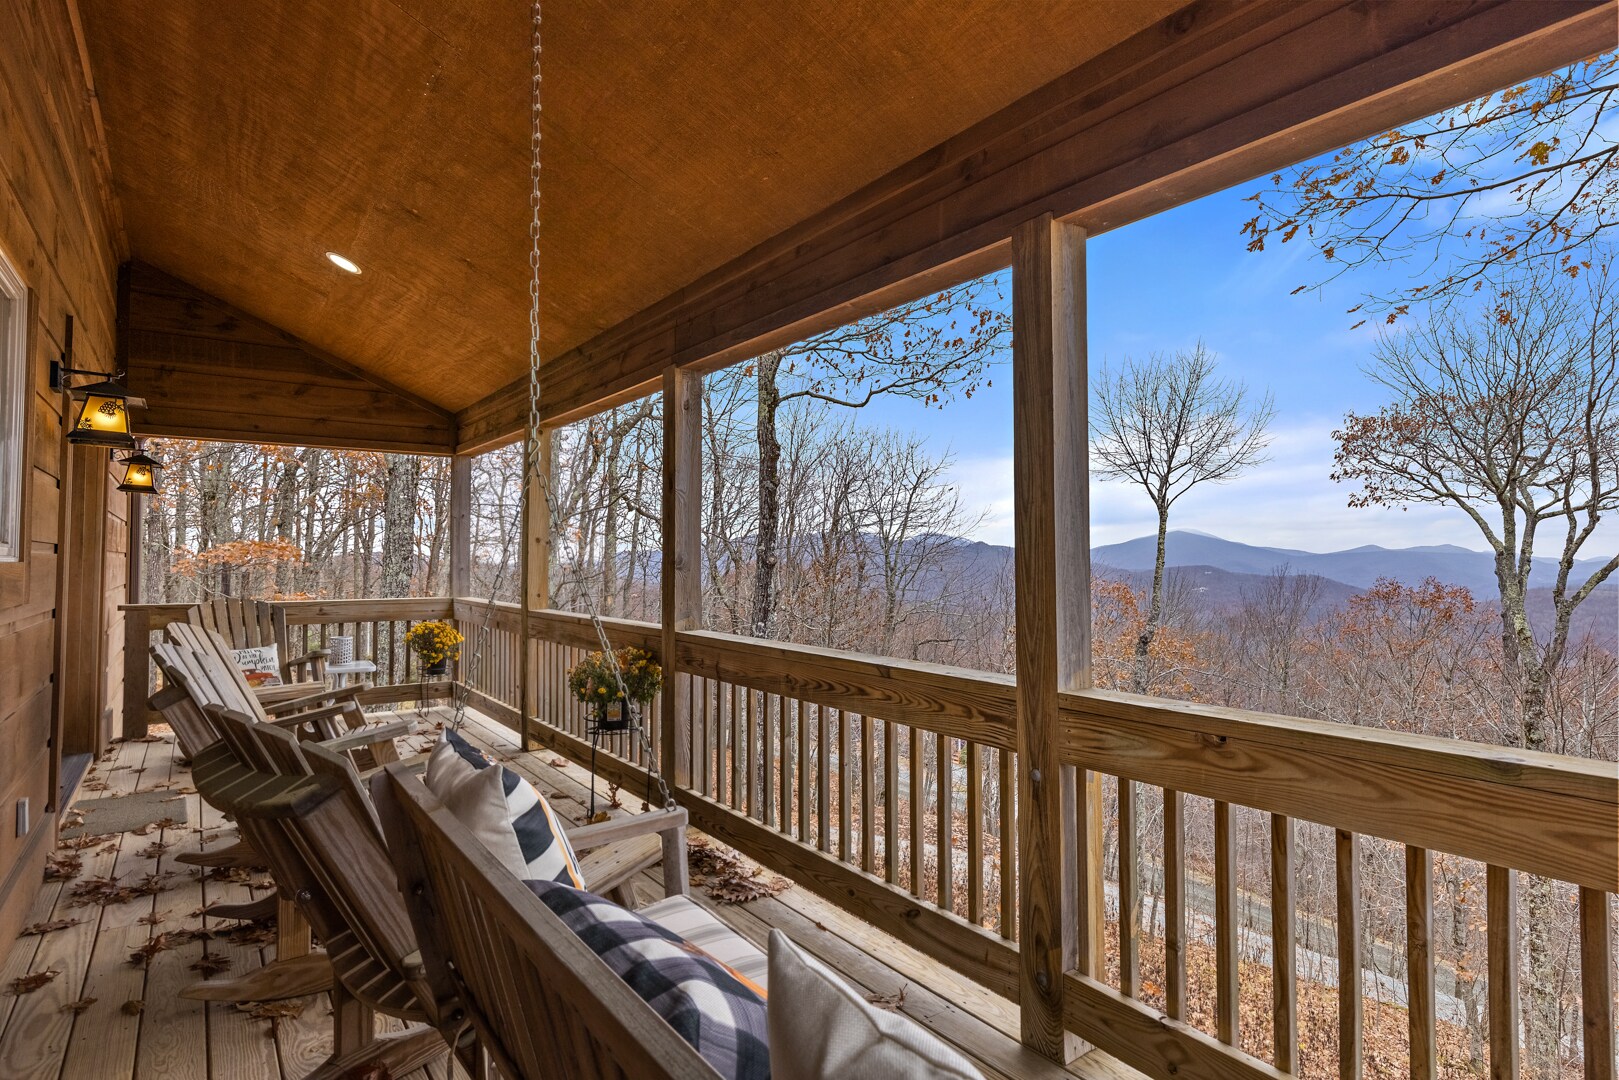 Porch Swing and Adirondack Style Seating on the Covered Deck Overlooking Long-Range Mountain Views